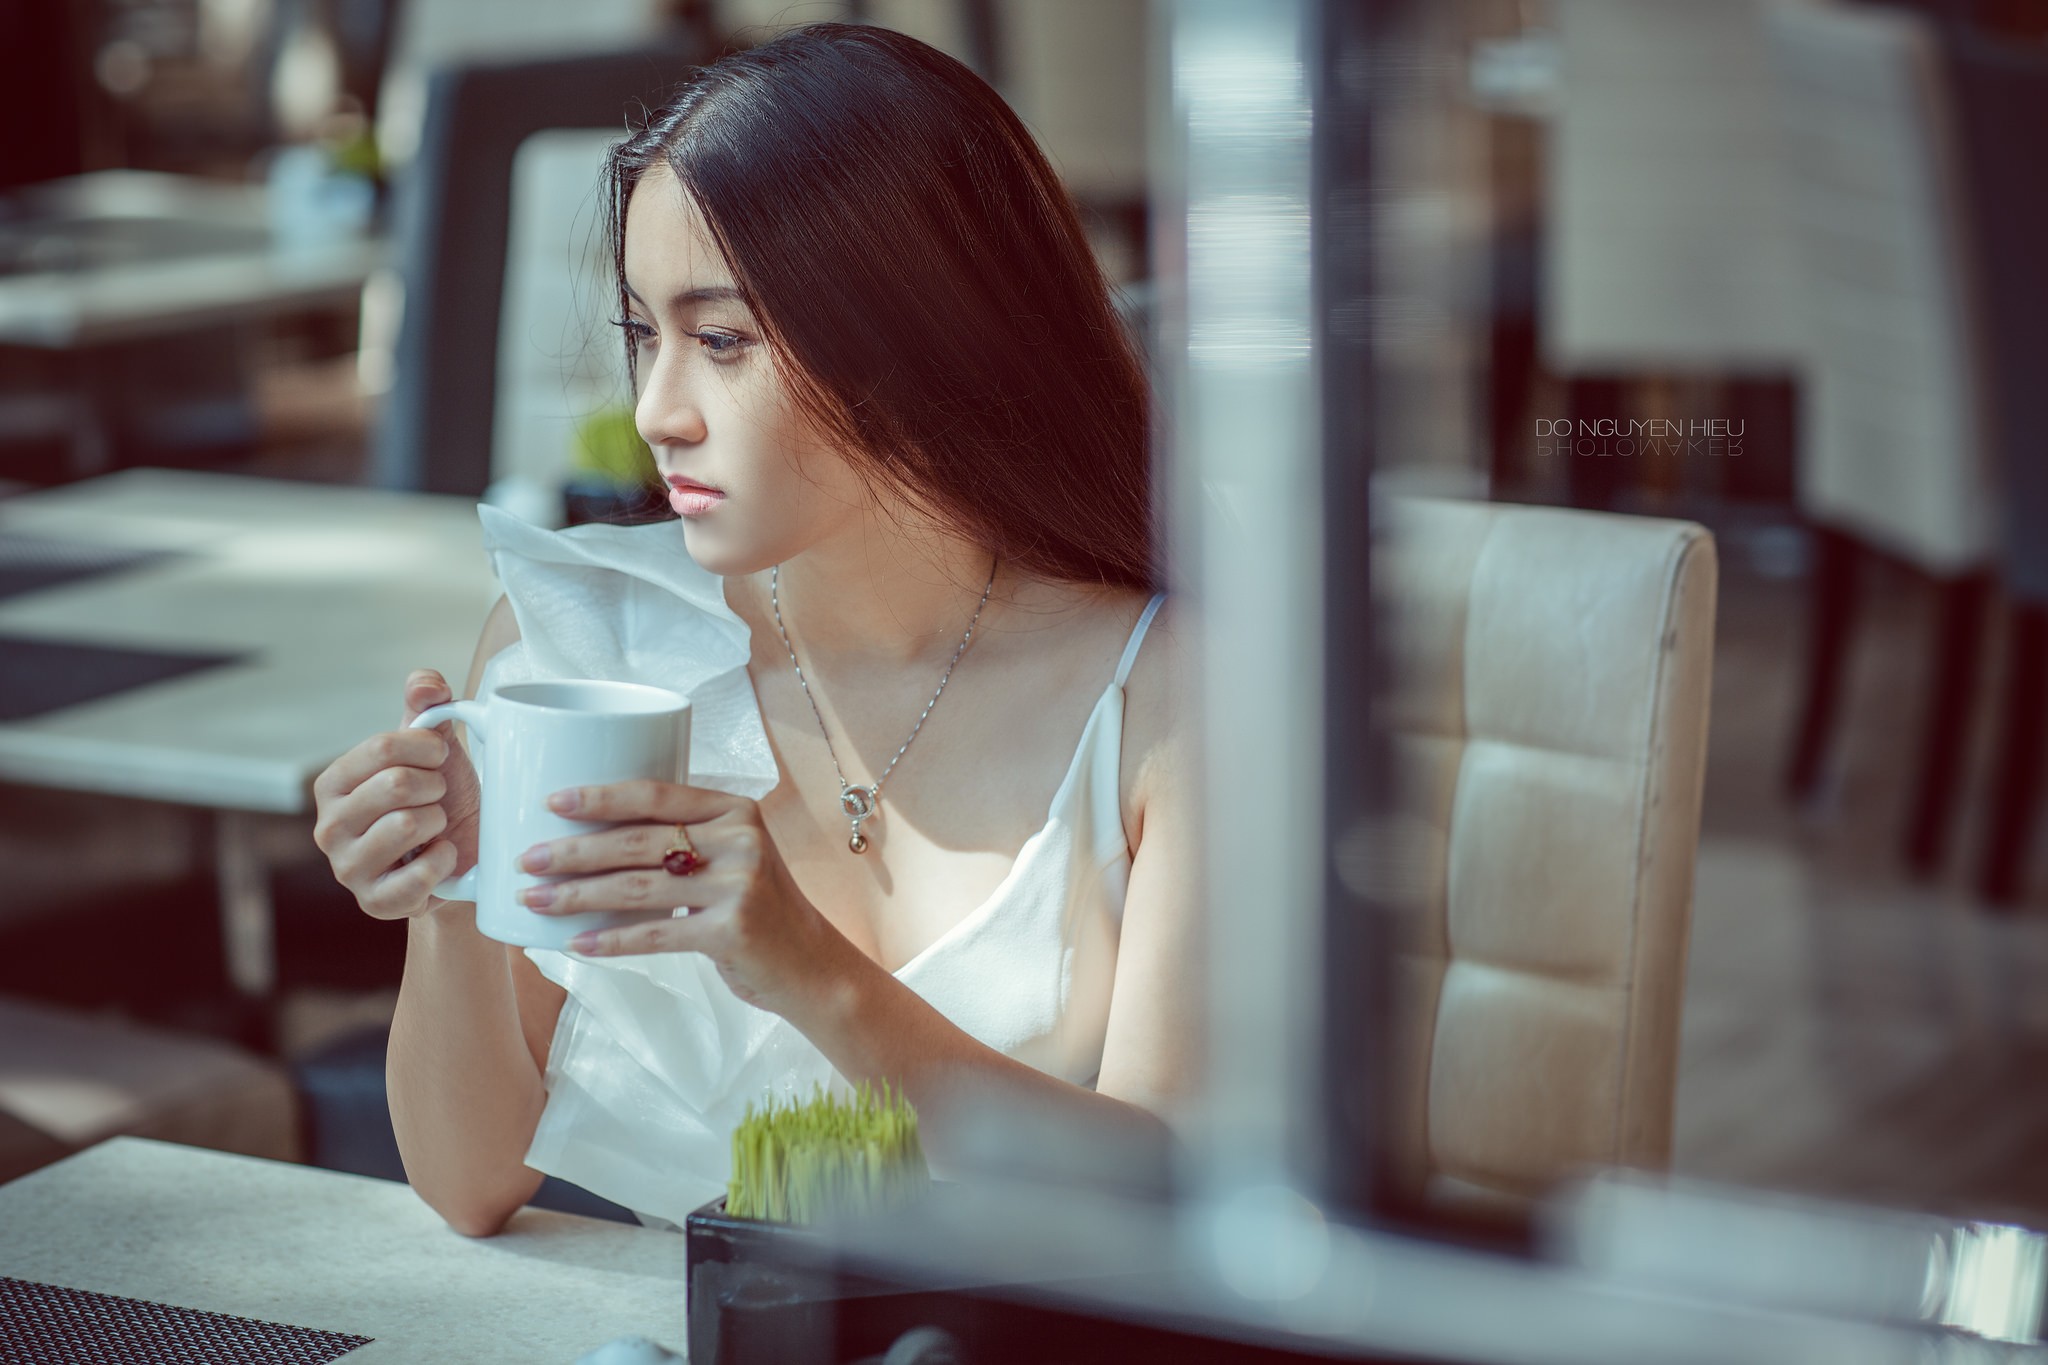 People 2048x1365 brunette looking away thinking white tops coffee house coffee cup cup Asian women model necklace watermarked Do Nguyen Hieu